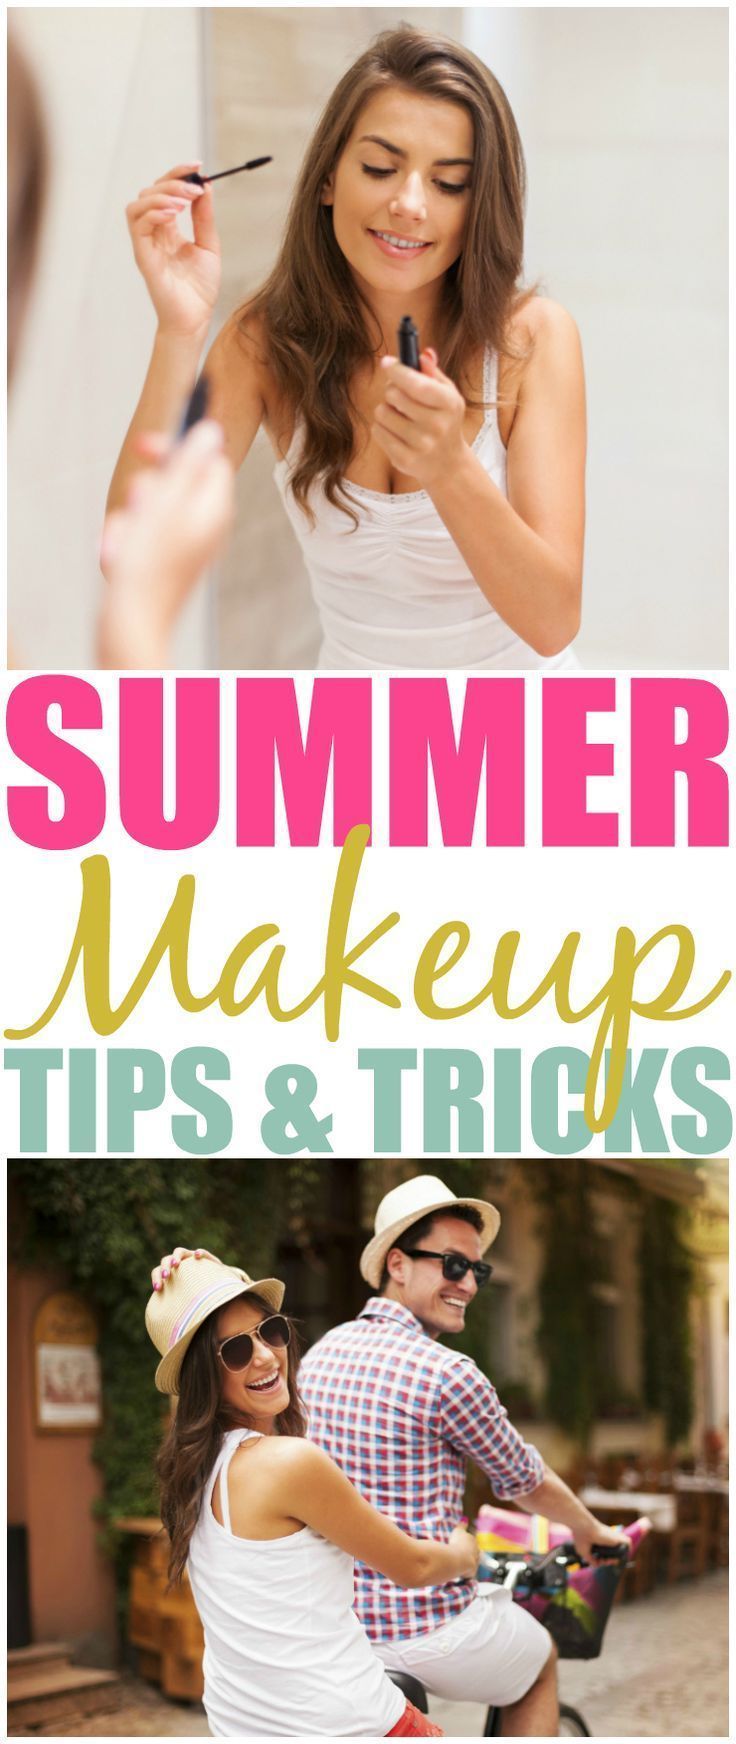 Summer Makeup Tips And Tricks to Keep You Looking Flawless -   12 summer makeup Hacks ideas